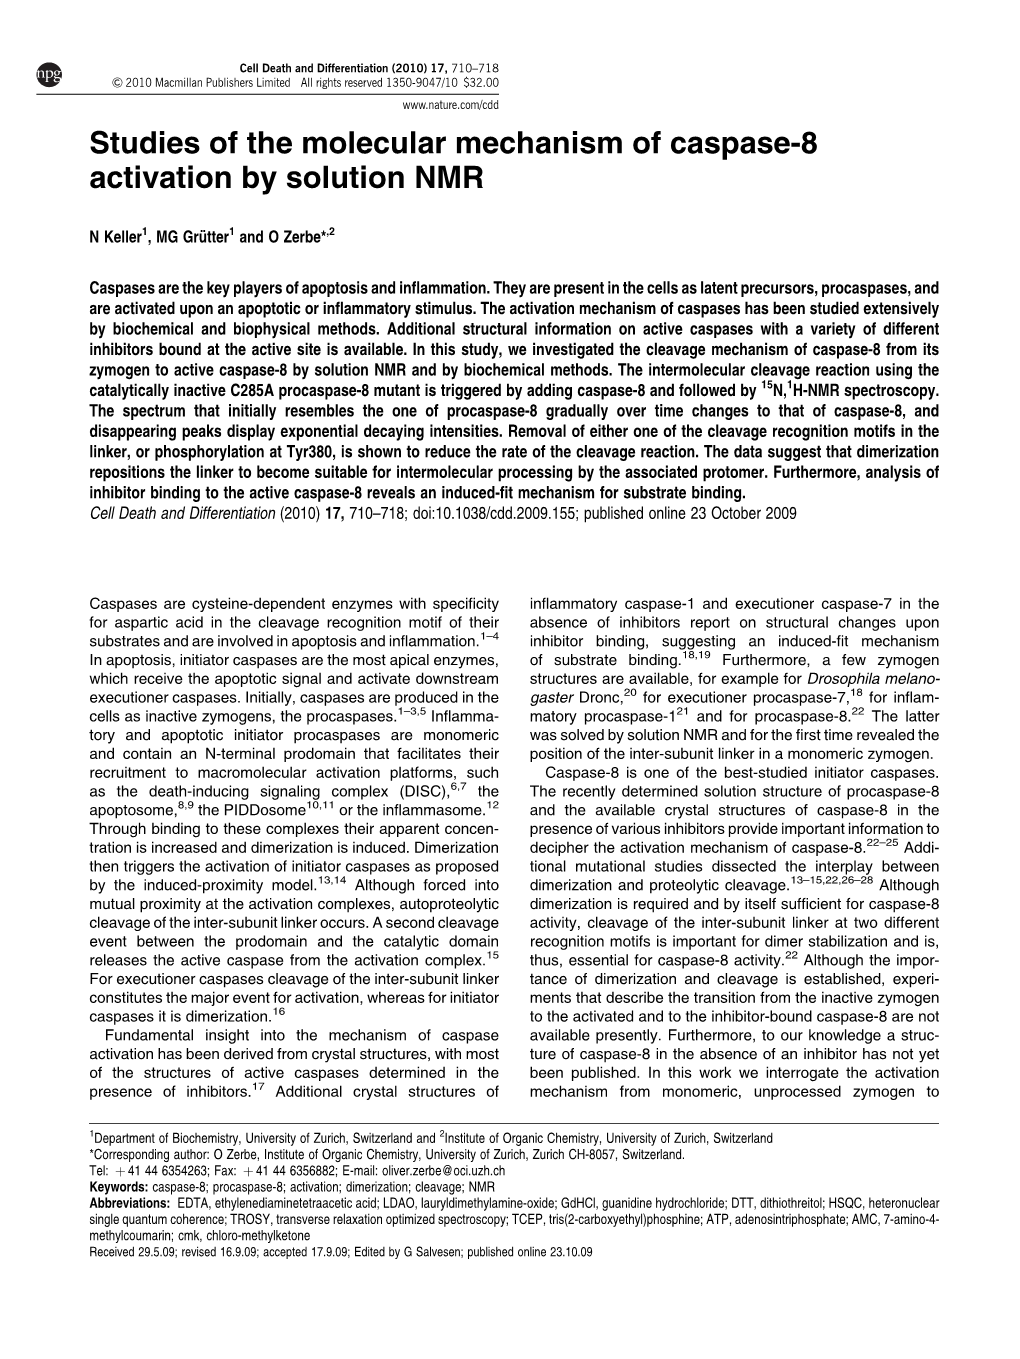 Studies of the Molecular Mechanism of Caspase-8 Activation by Solution NMR